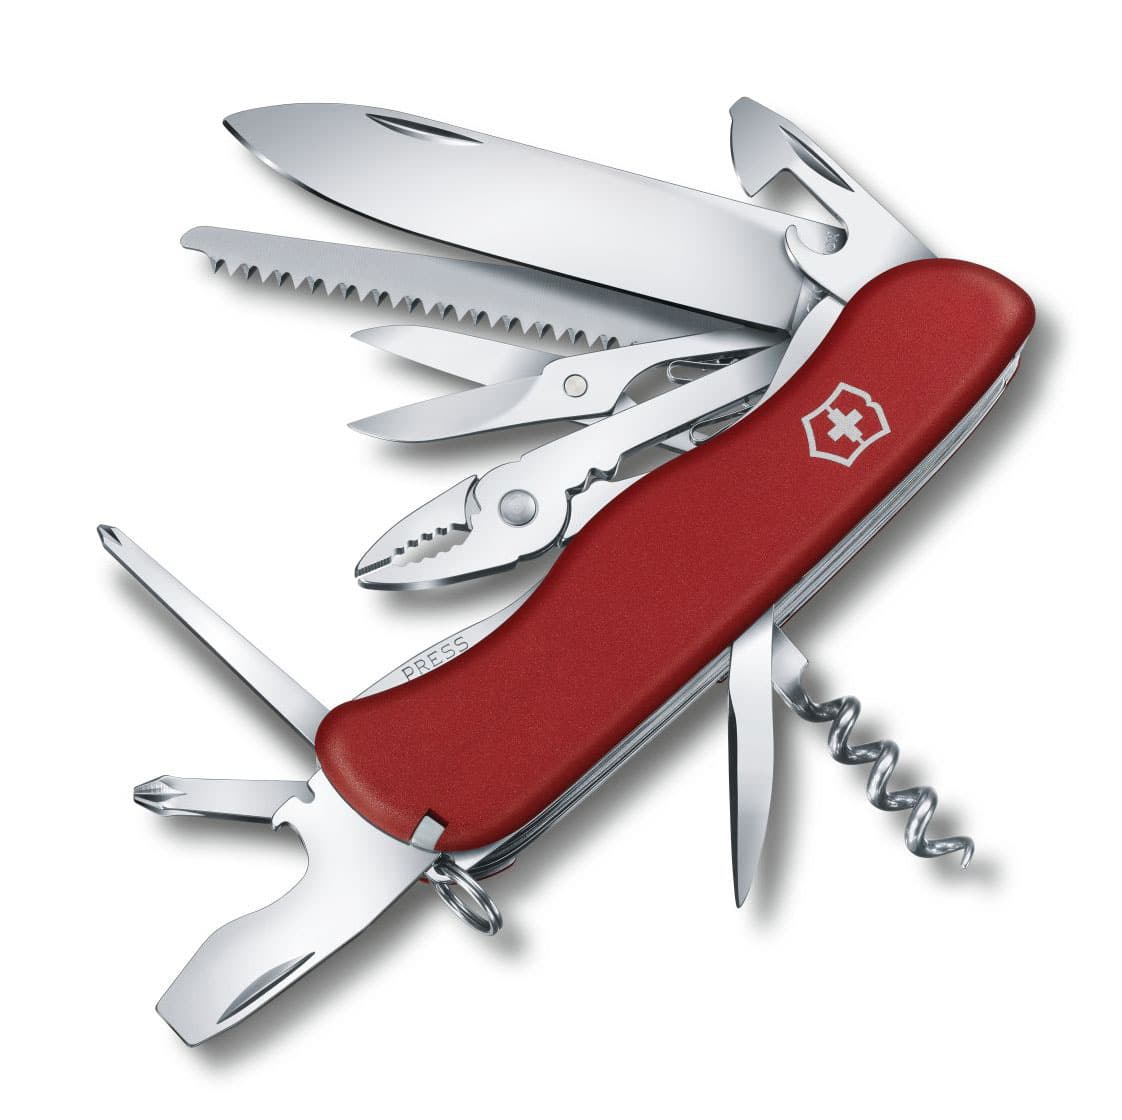 A Hilarious Novelty Watch That Commemorates the Famous Swiss Army Knife